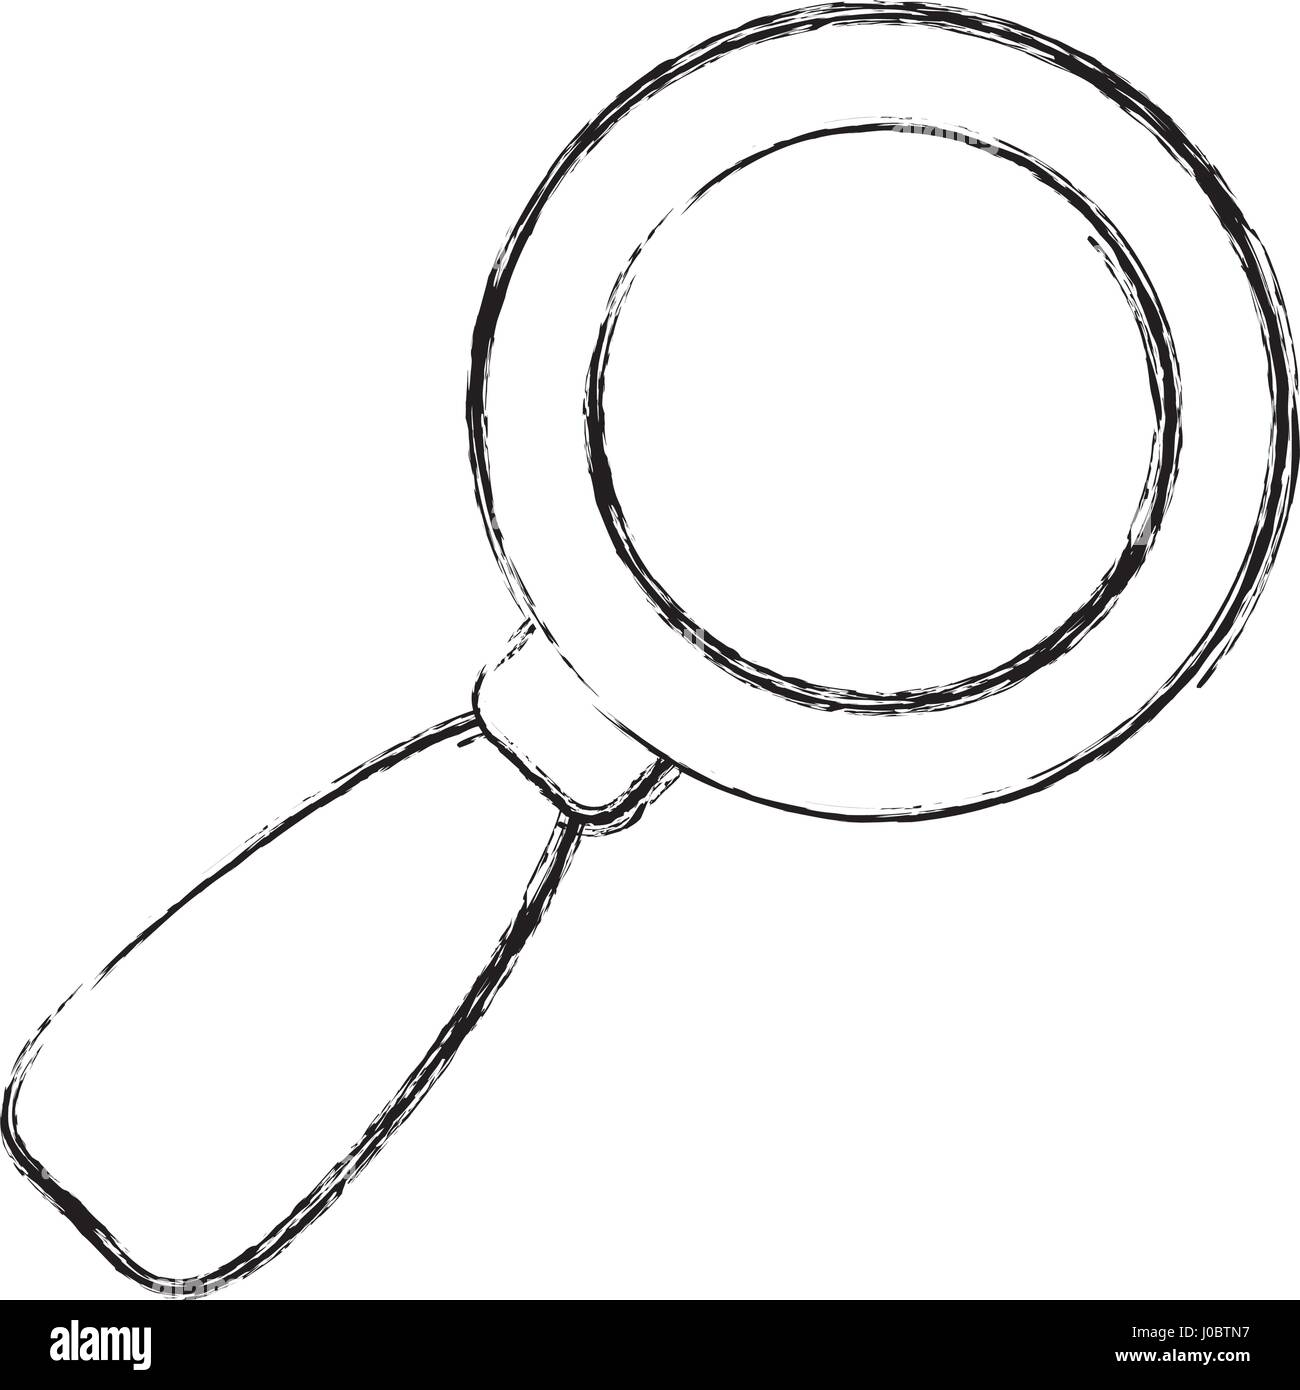 Detective Draw Black And White Stock Photos Images Alamy